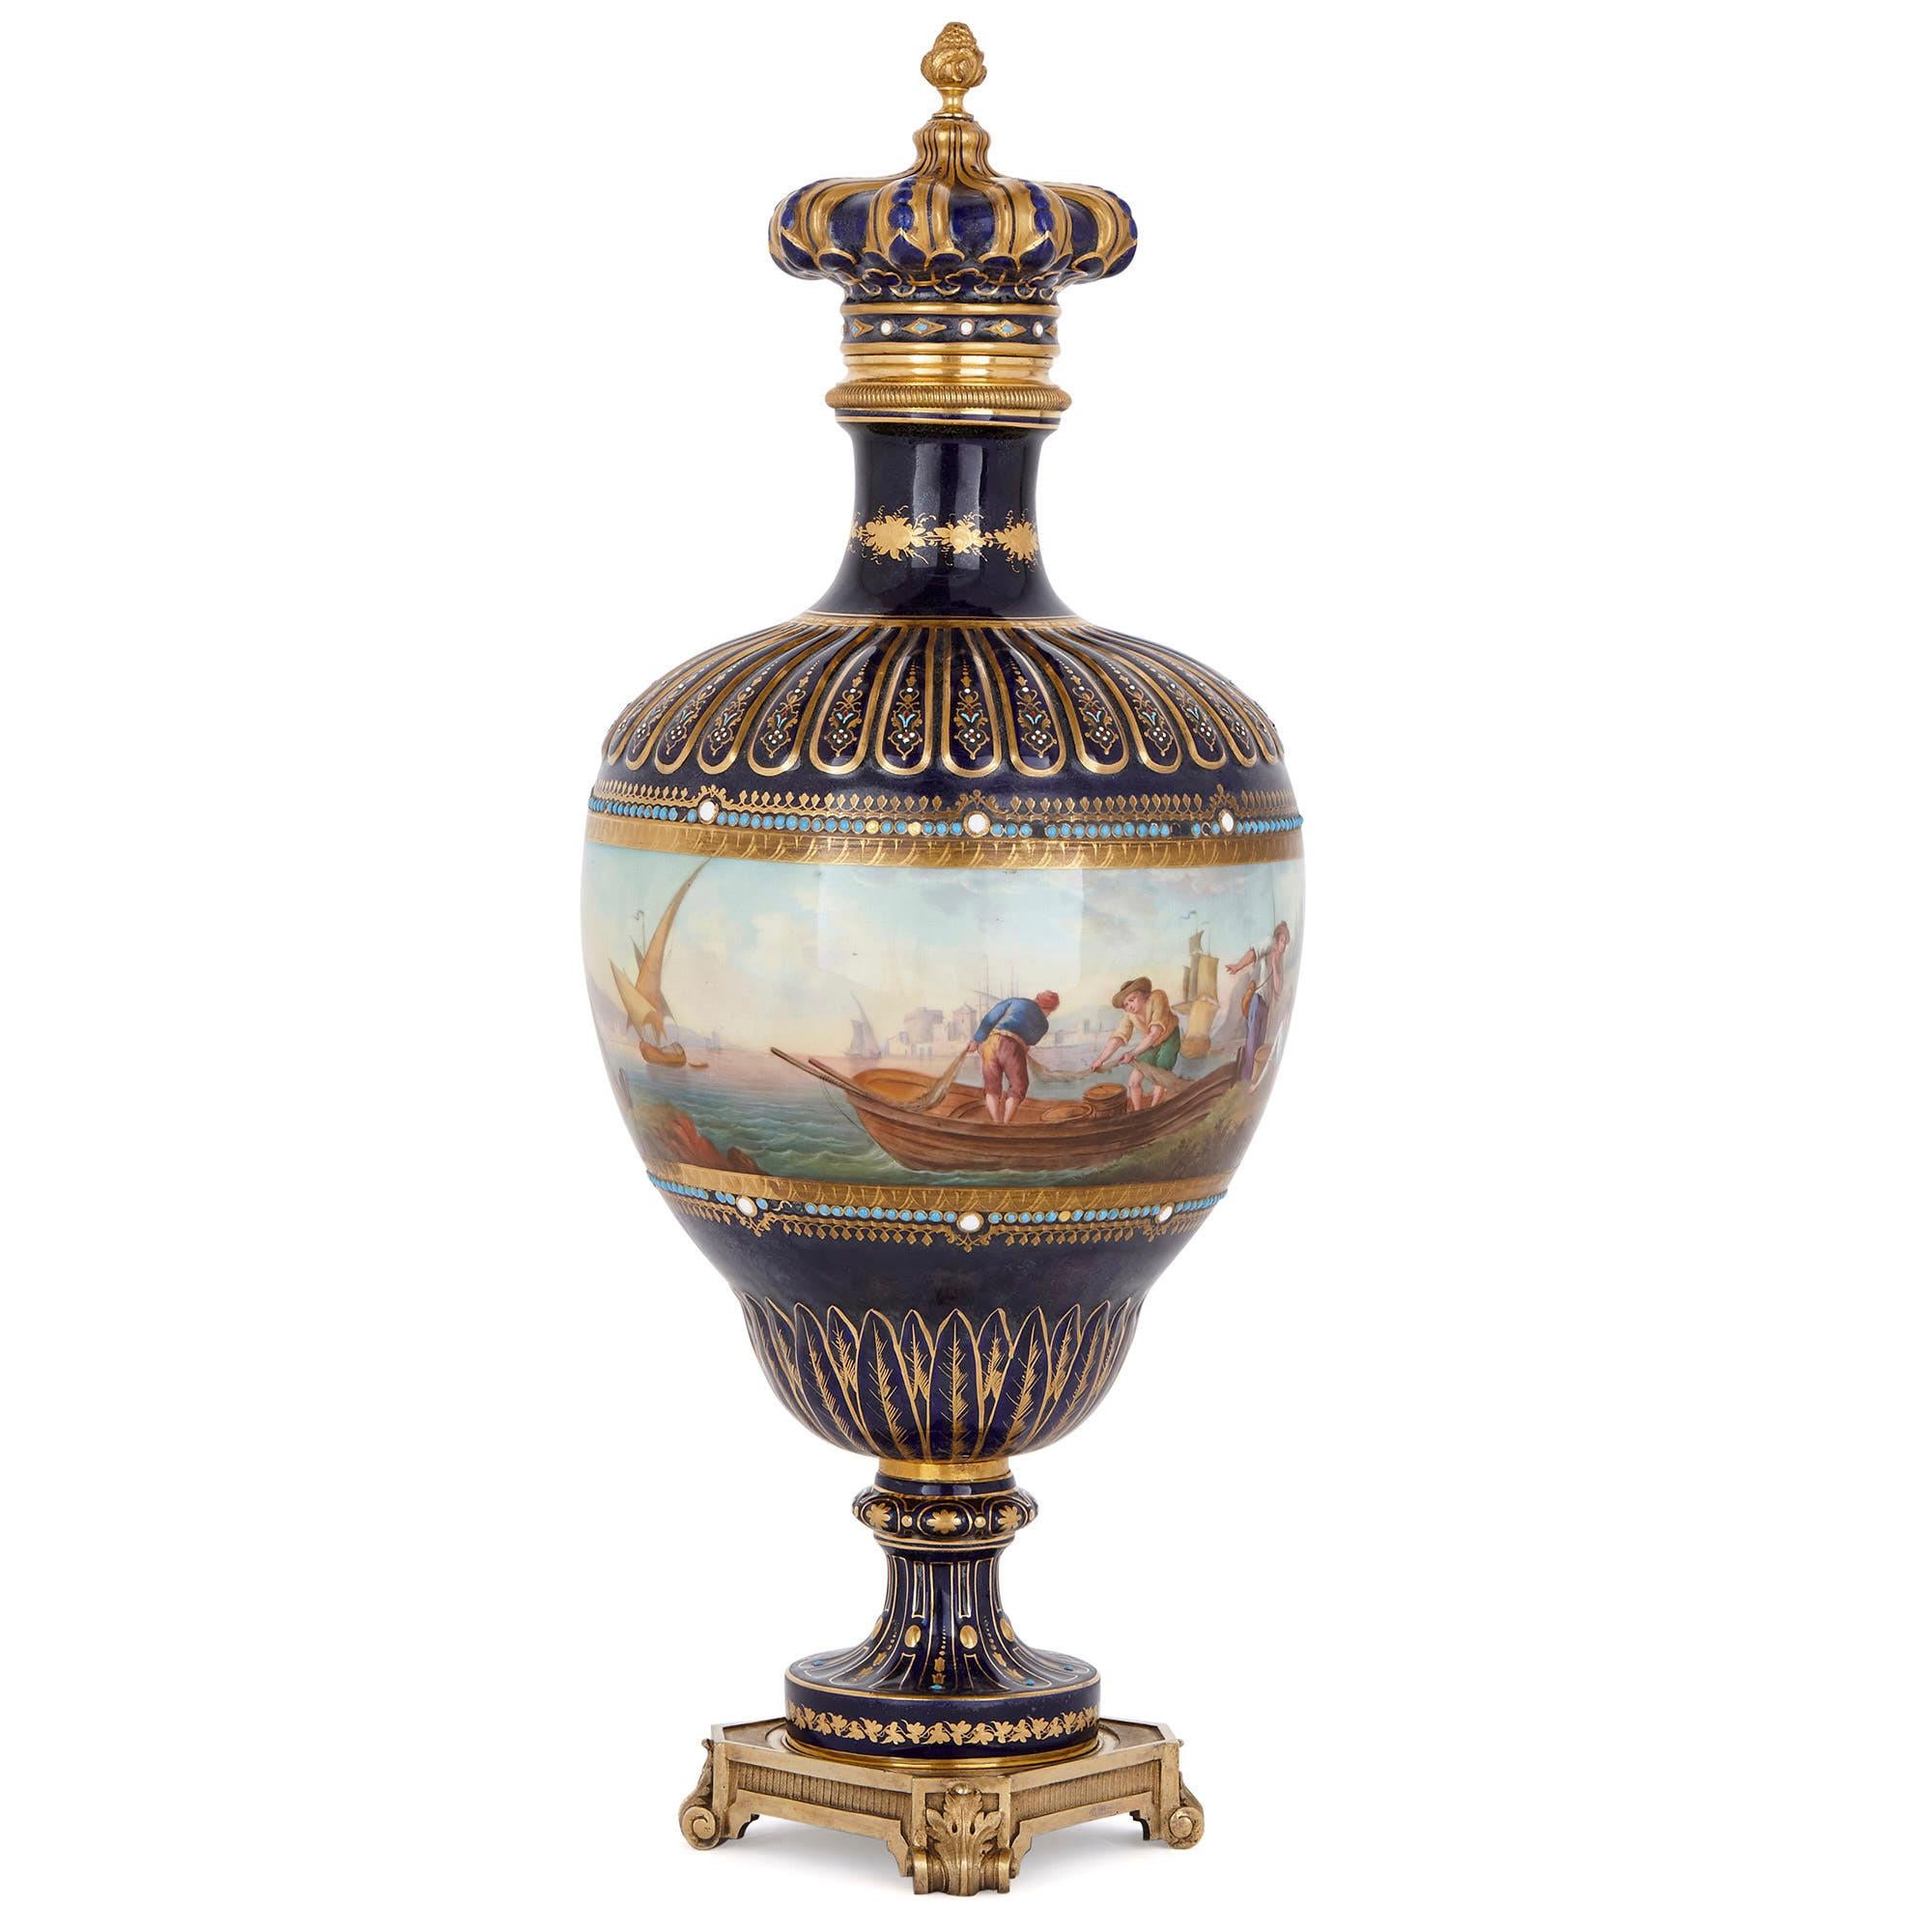 This beautiful vase was created in France, in the period when Napoleon III was Emperor (1852-1870). It is designed in the style of Sèvres Manufactory porcelain. Sèvres goods are often beautifully hand painted with pastoral and mythological scenes,